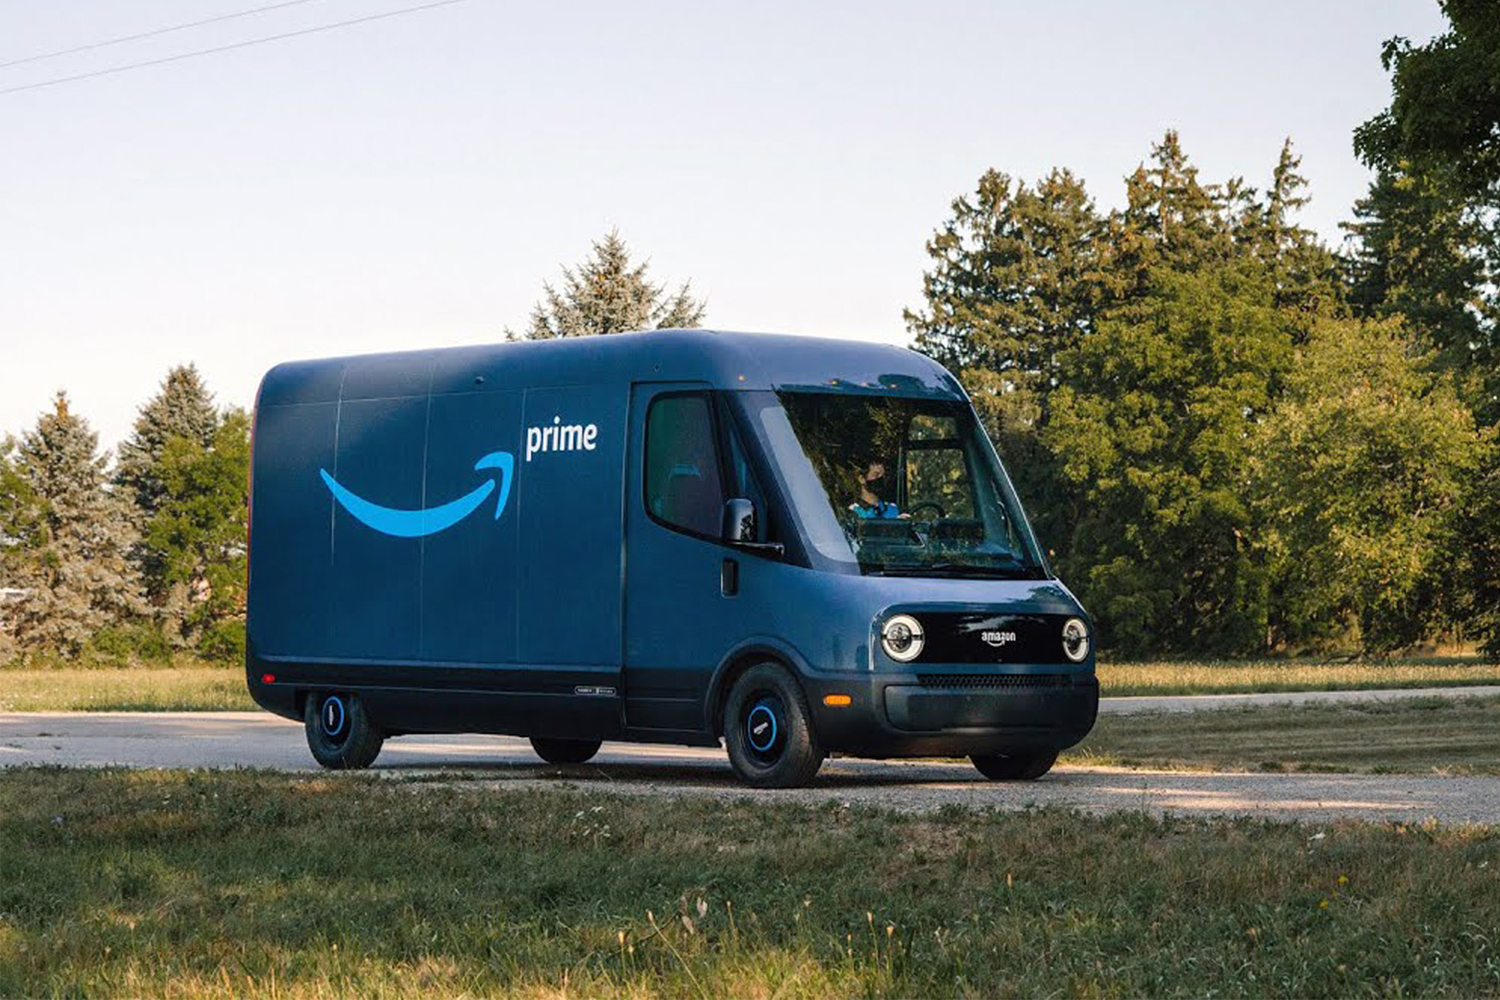 Stop Overreacting About the Sound of Amazon's Electric Delivery Vans